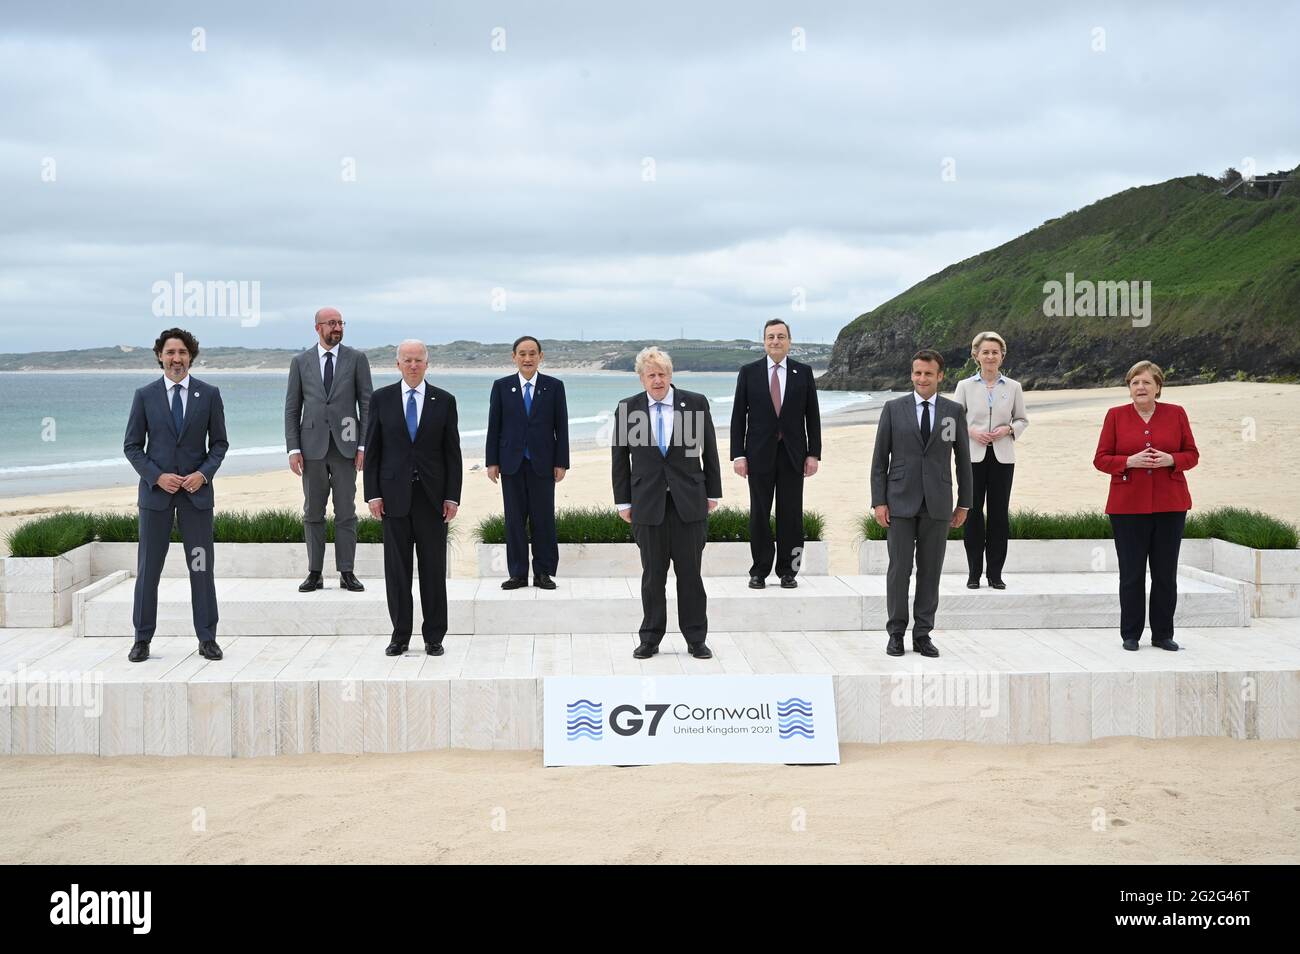 (left to right) Canadian Prime Minister Justin Trudeau, President of the European Council Charles Michel, US President Joe Biden, Japanese Prime Minister Yoshihide Suga, British Prime Minister Boris Johnson, Italian Prime Minister Mario Draghi, French President Emmanuel Macron, President of the European Commission Ursula von der Leyen and German Chancellor Angela Merkel, during the leaders official welcome and family photo in Carbis Bay, during the G7 summit in Cornwall. Picture date: Friday June 11, 2021. Stock Photo